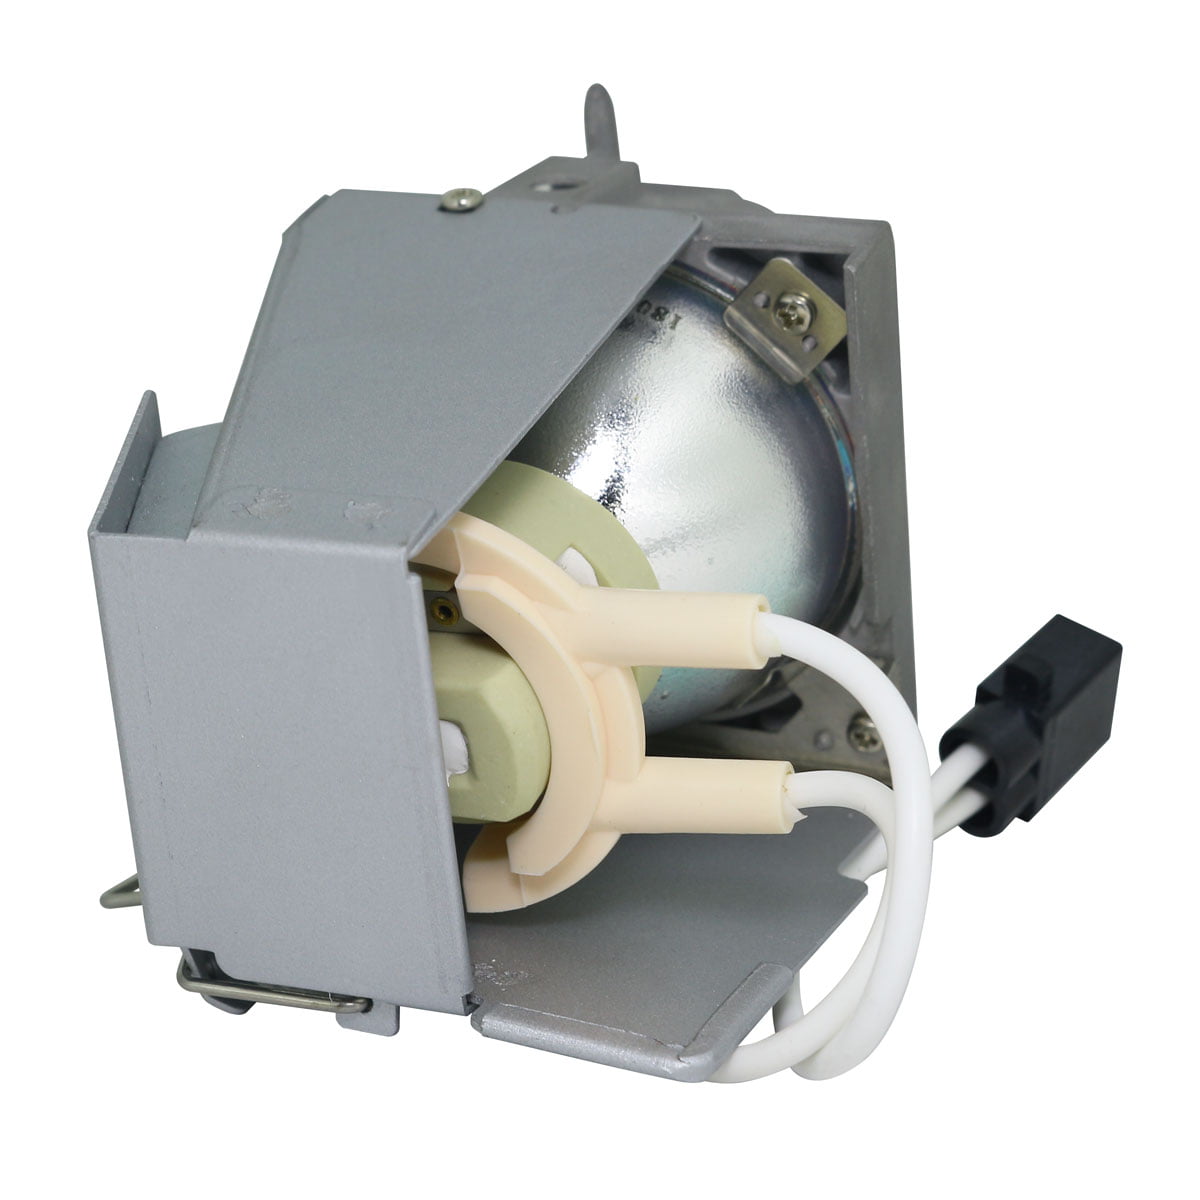 Bulb Only Original Philips Projector Lamp Replacement for Dell 1220